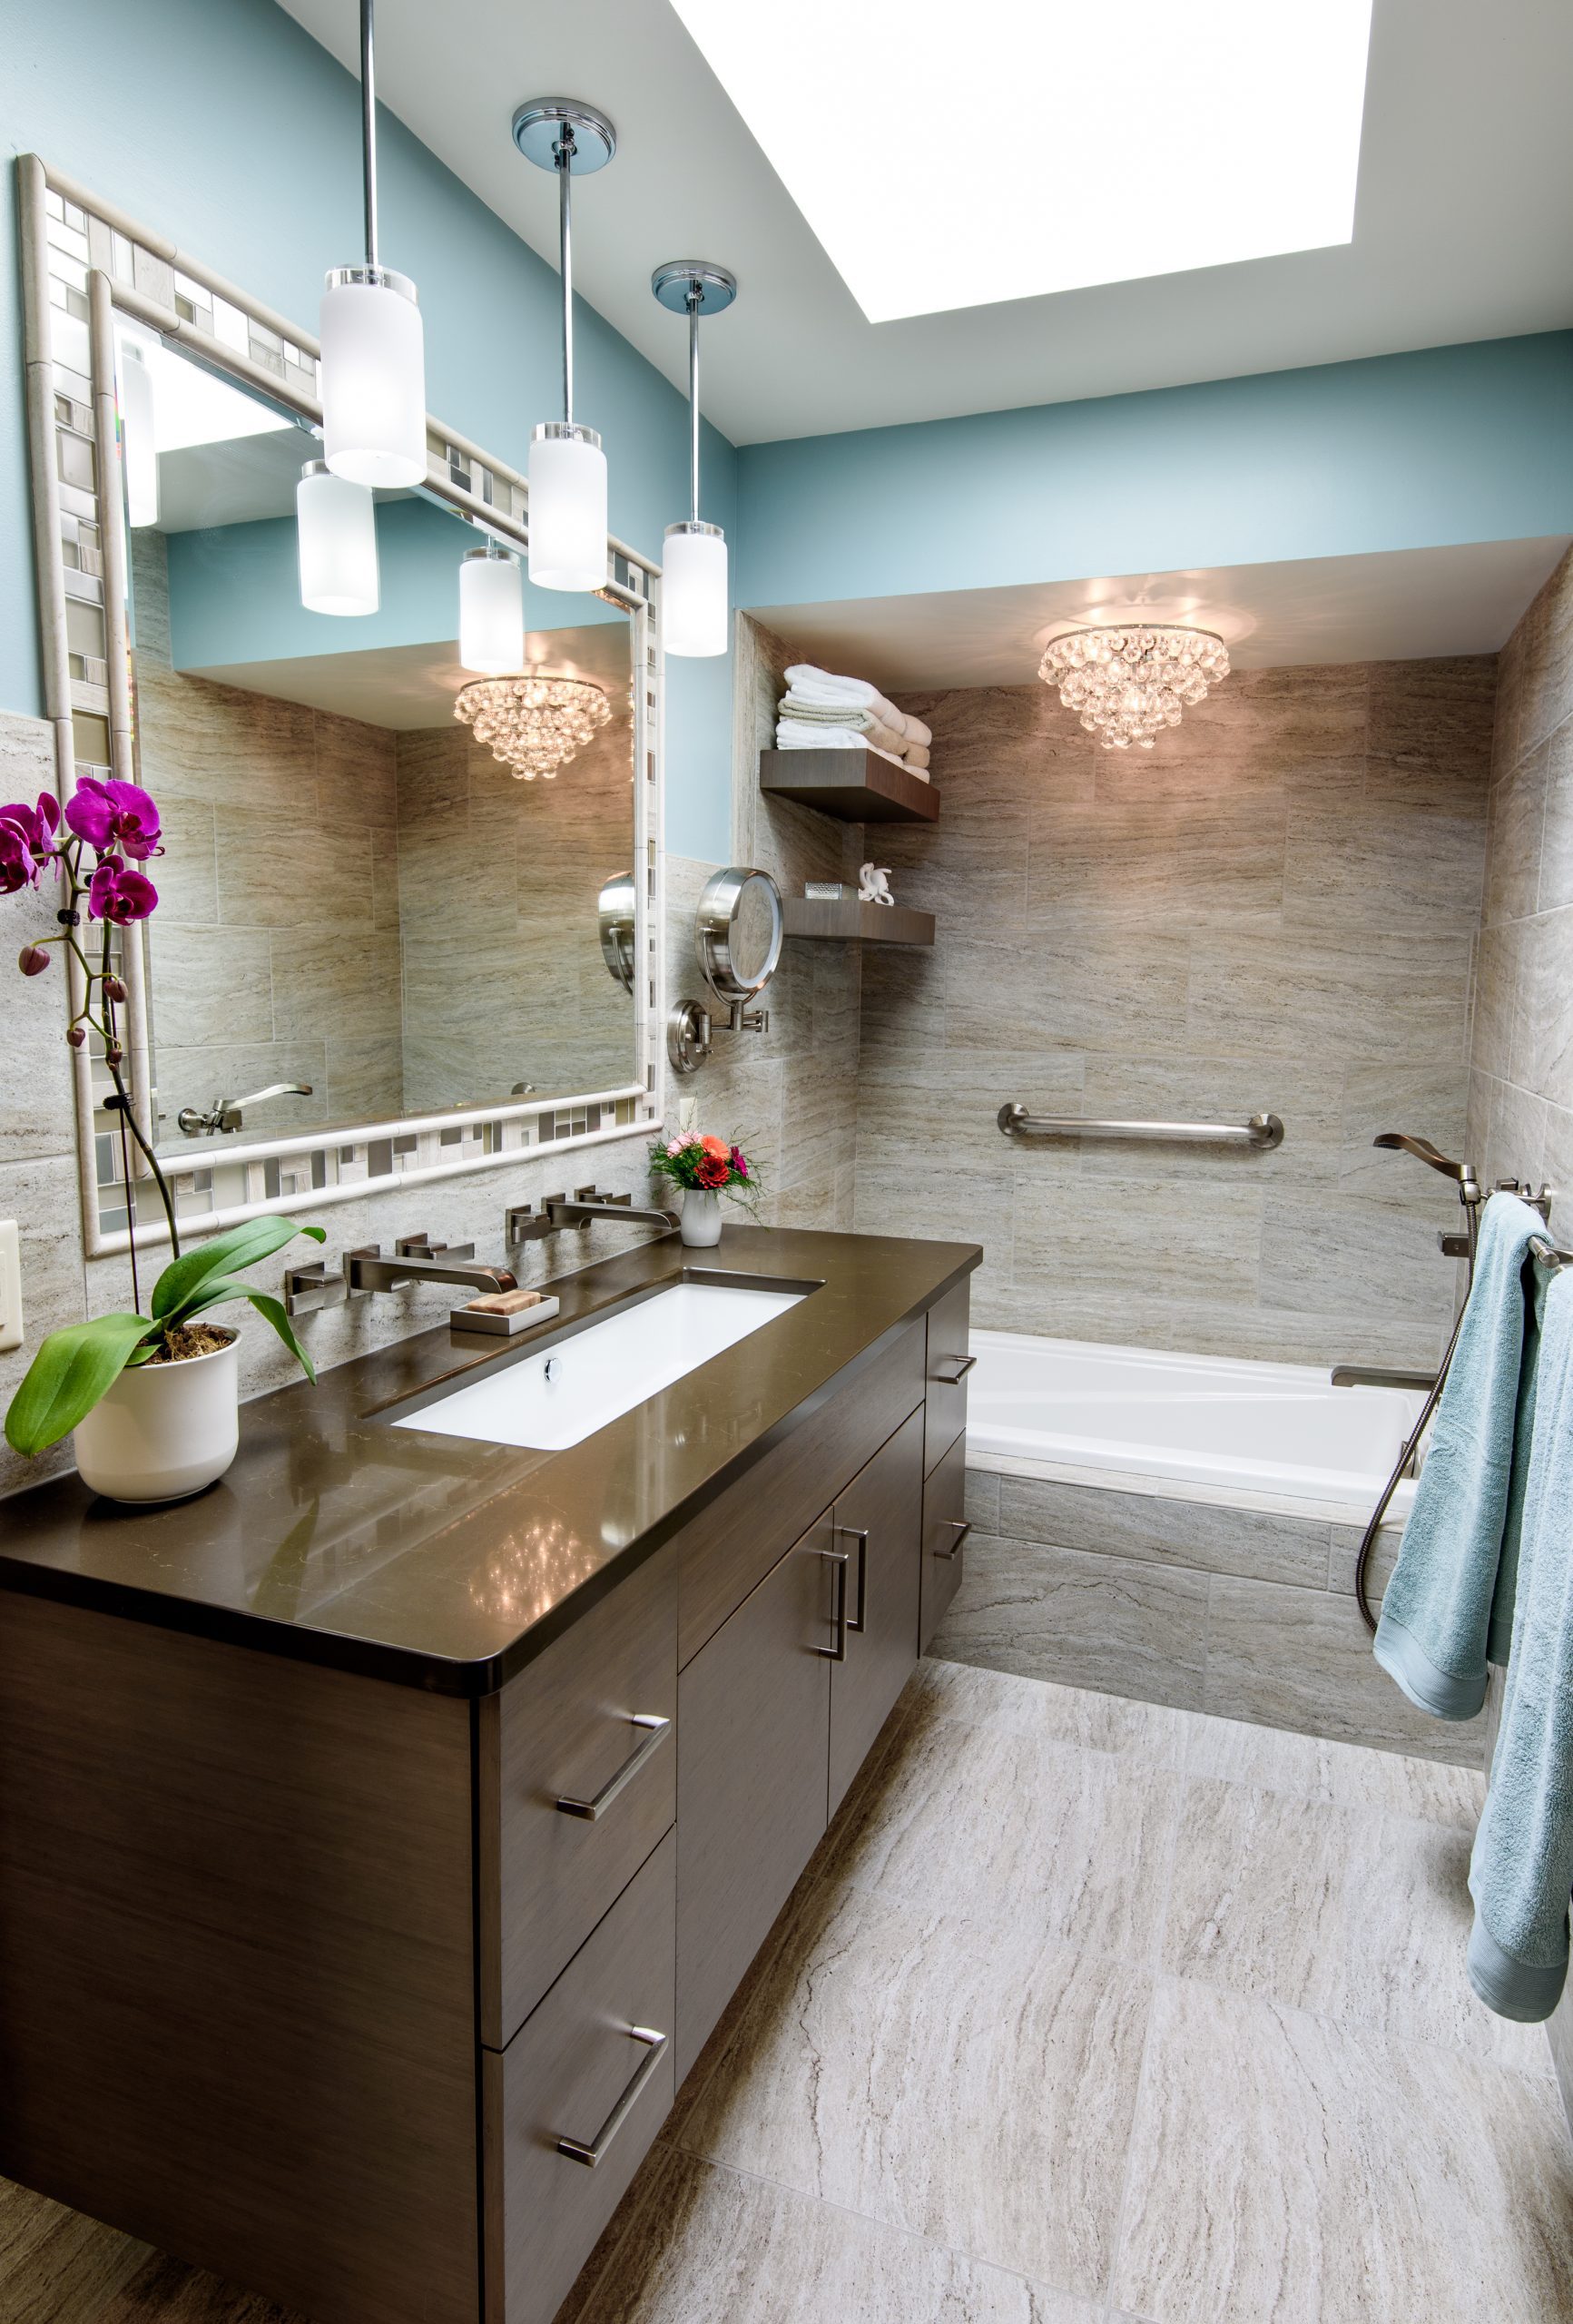 Timeless bathroom elegance with tub shower combo and chandelier.